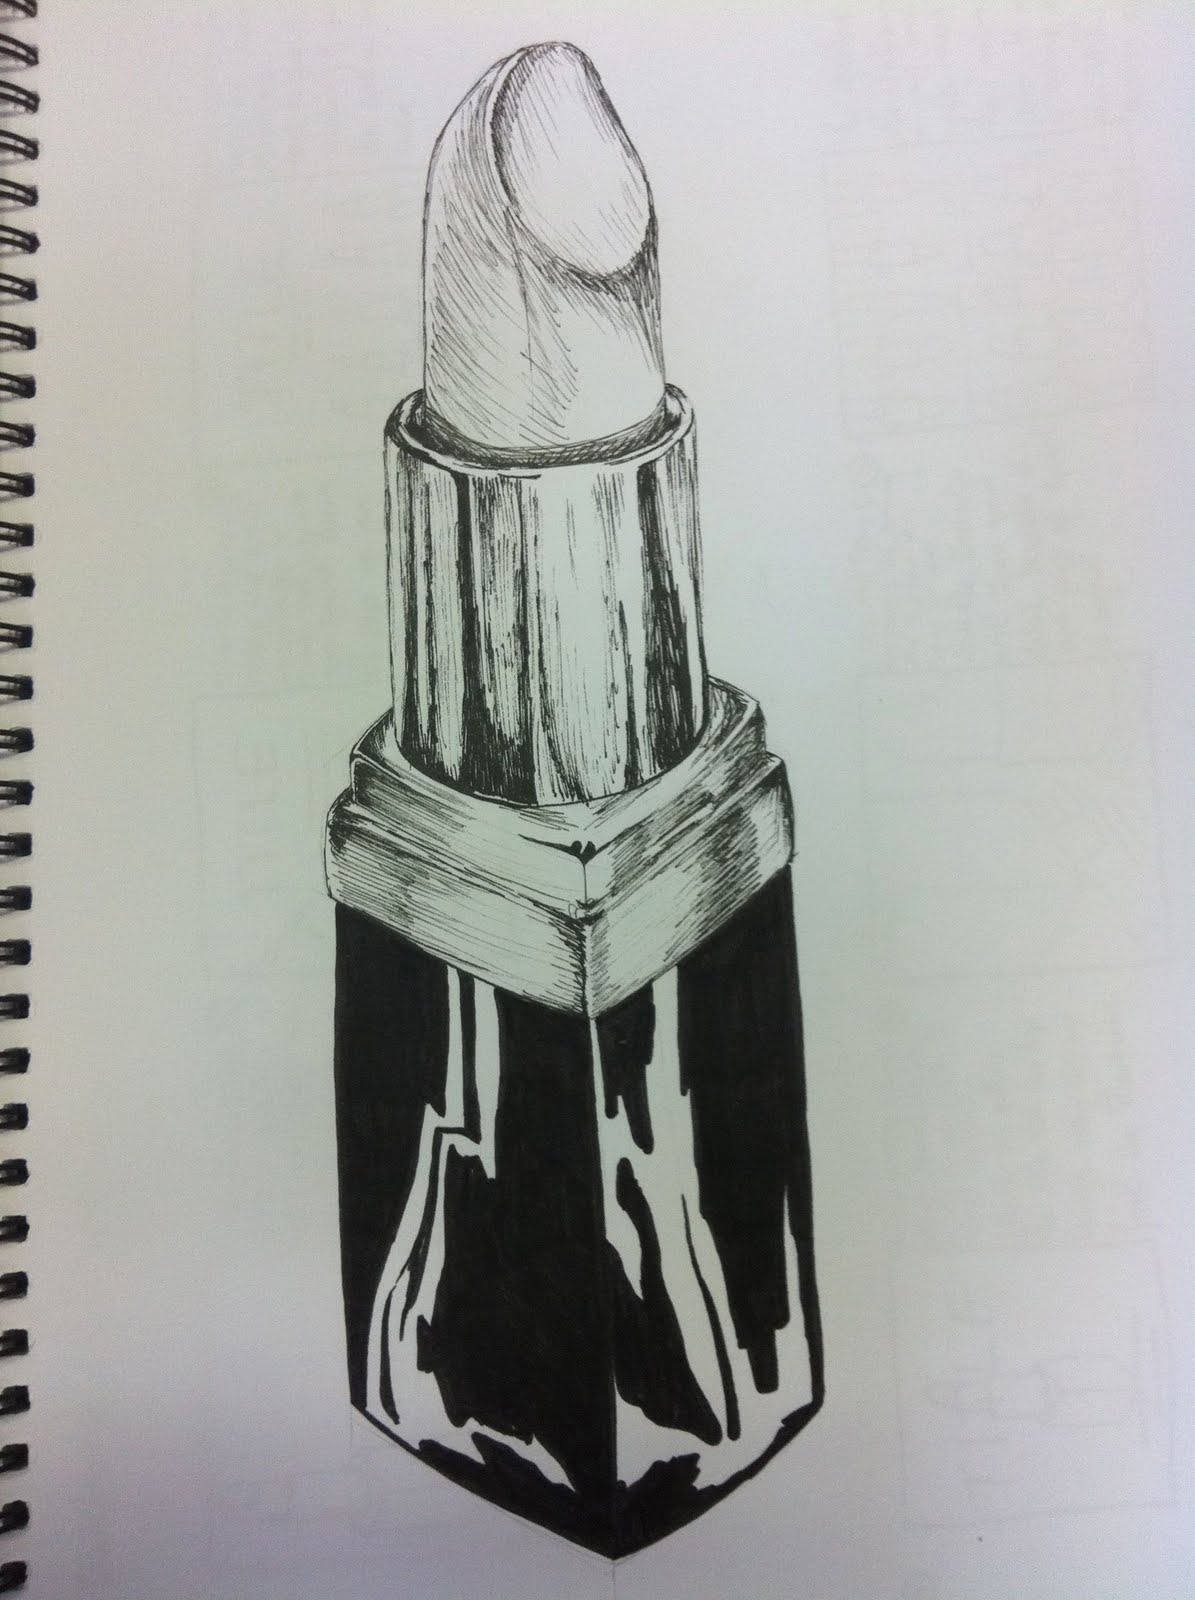  Lipstick Sketch Drawing with simple drawing